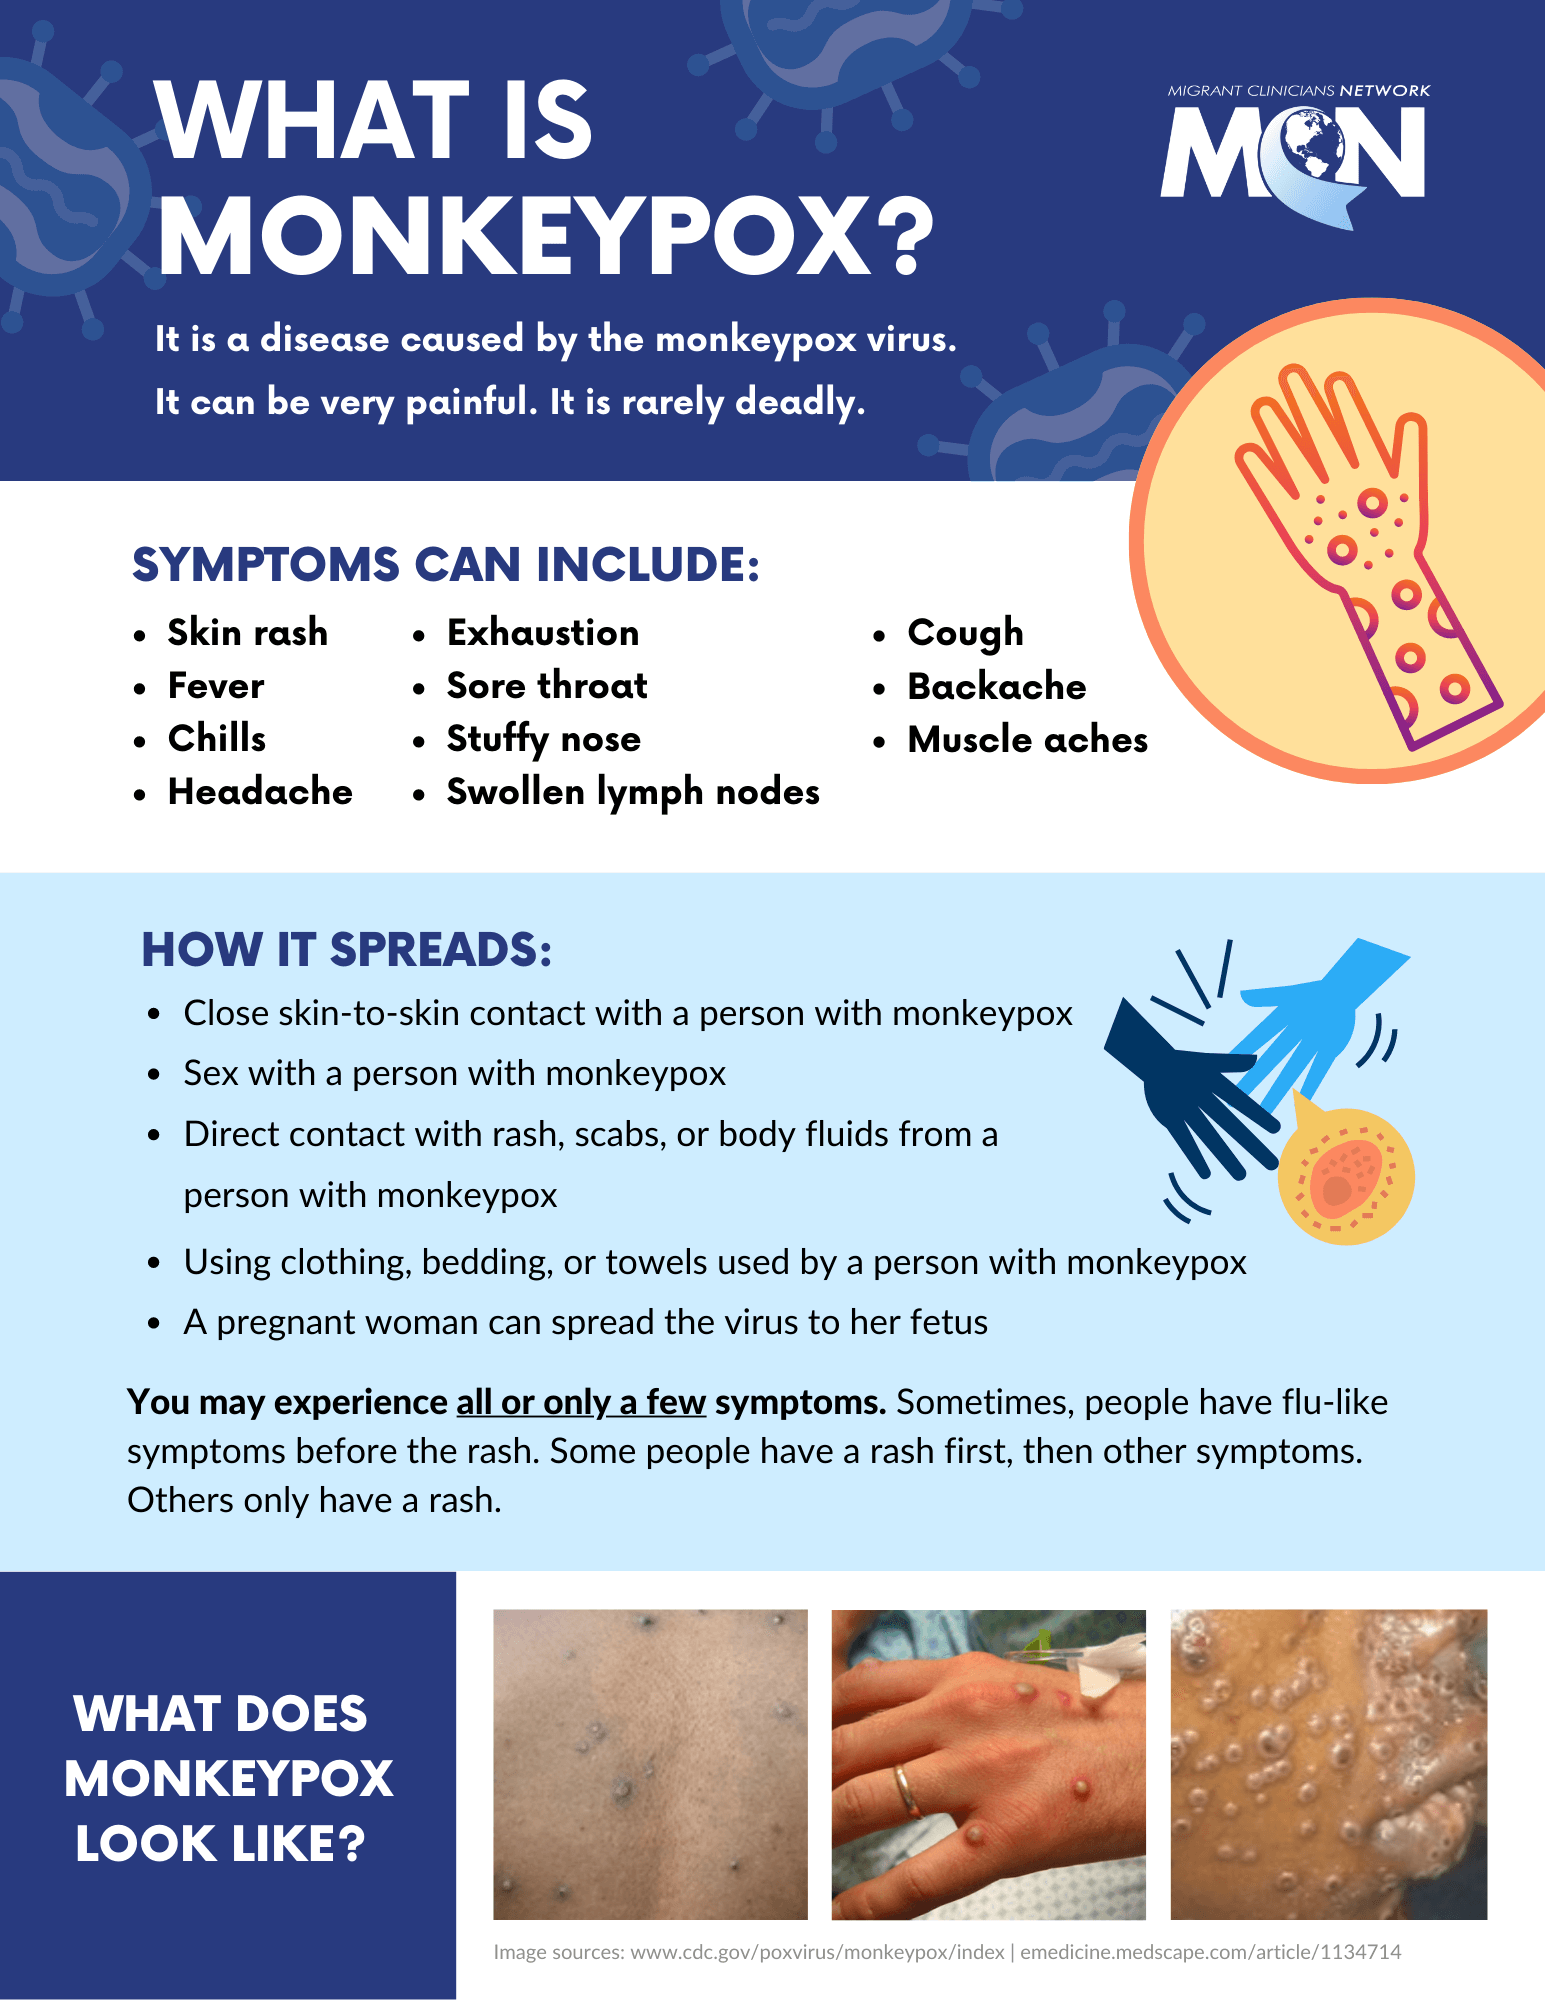 Factsheet with dark blue, light blue, and white background and Migrant Clinicians Network logo at top right corner. Information is divided into four horizontal sections with the following topics: What is monkeypox?; Symptoms; how it spreads; what does monkeypox look like? Images of monkeypox rash and bumps on back, hand, and face are along the bottom.